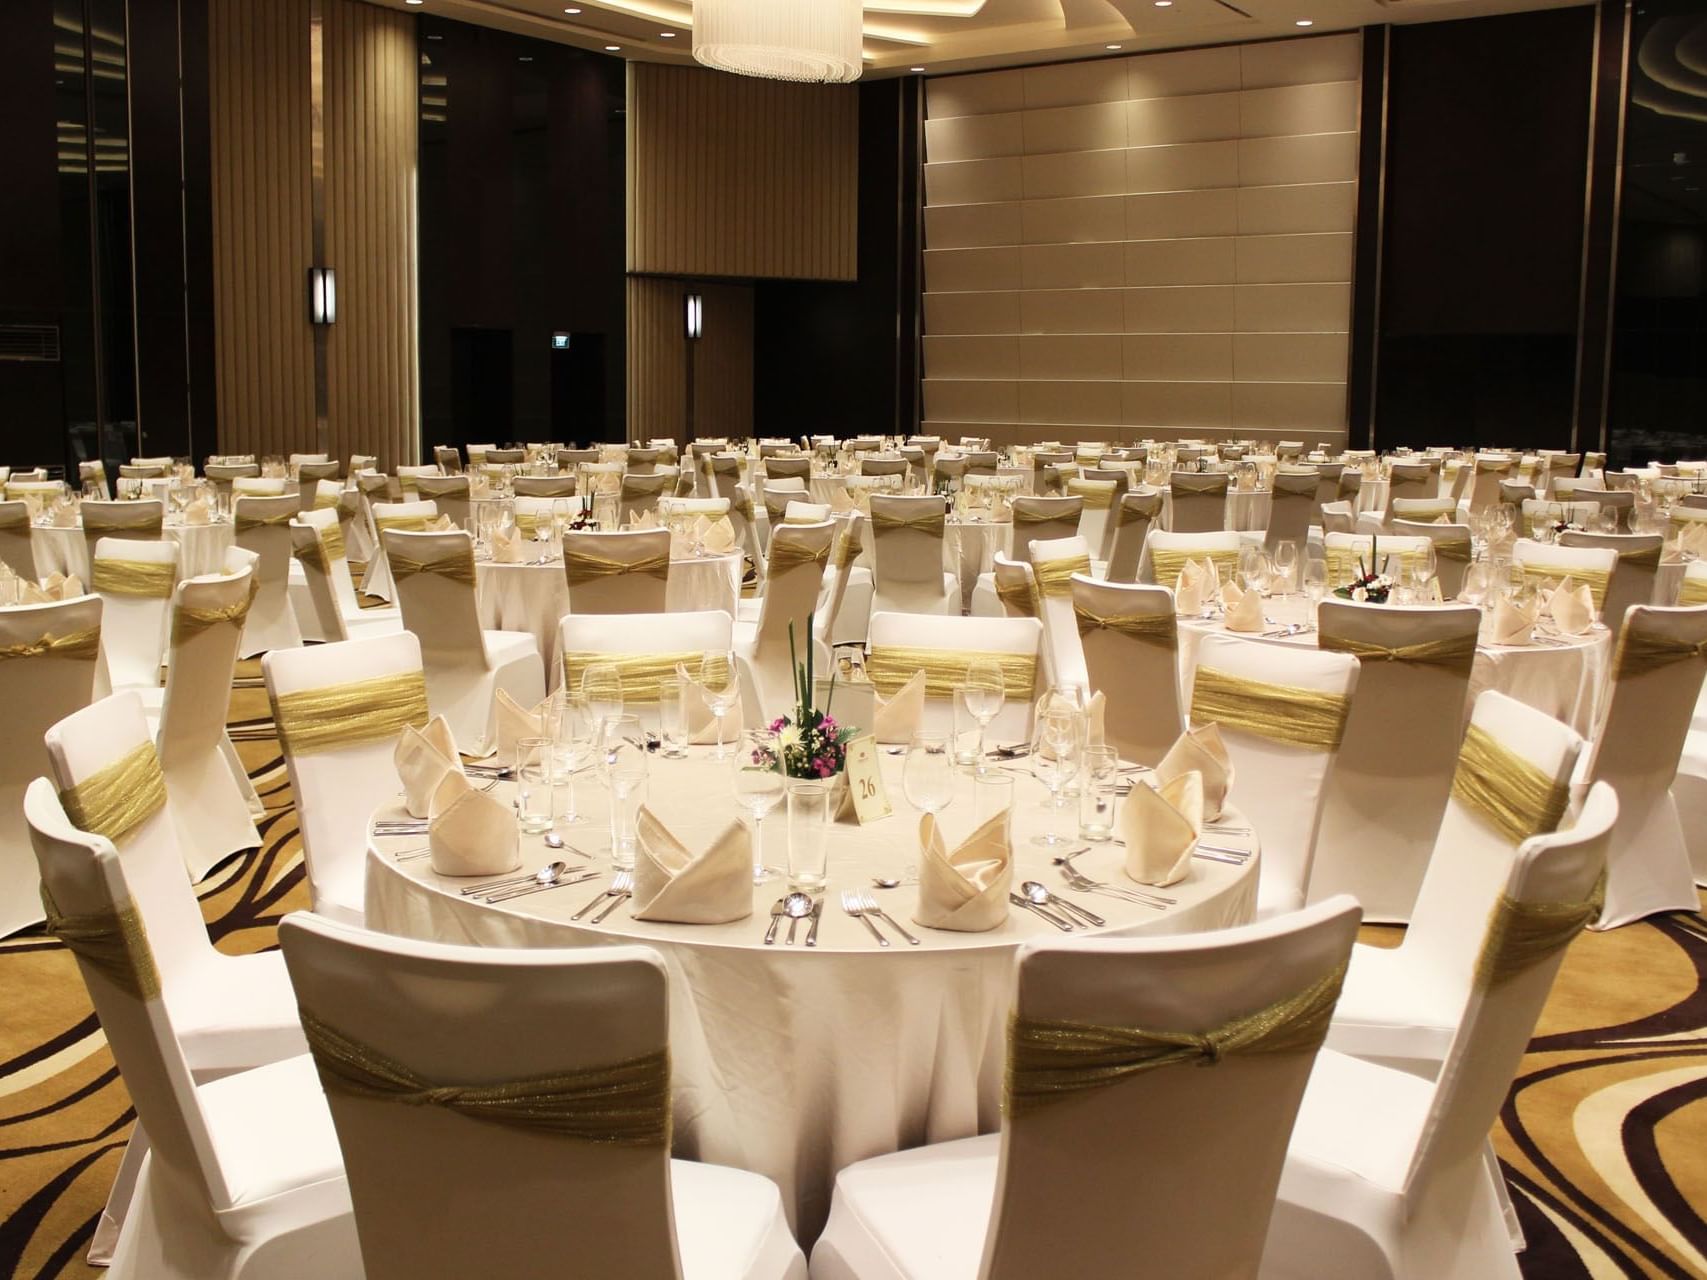 Banquet tables arranged in Ballroom with carpeted floors at Po Hotel Semarang